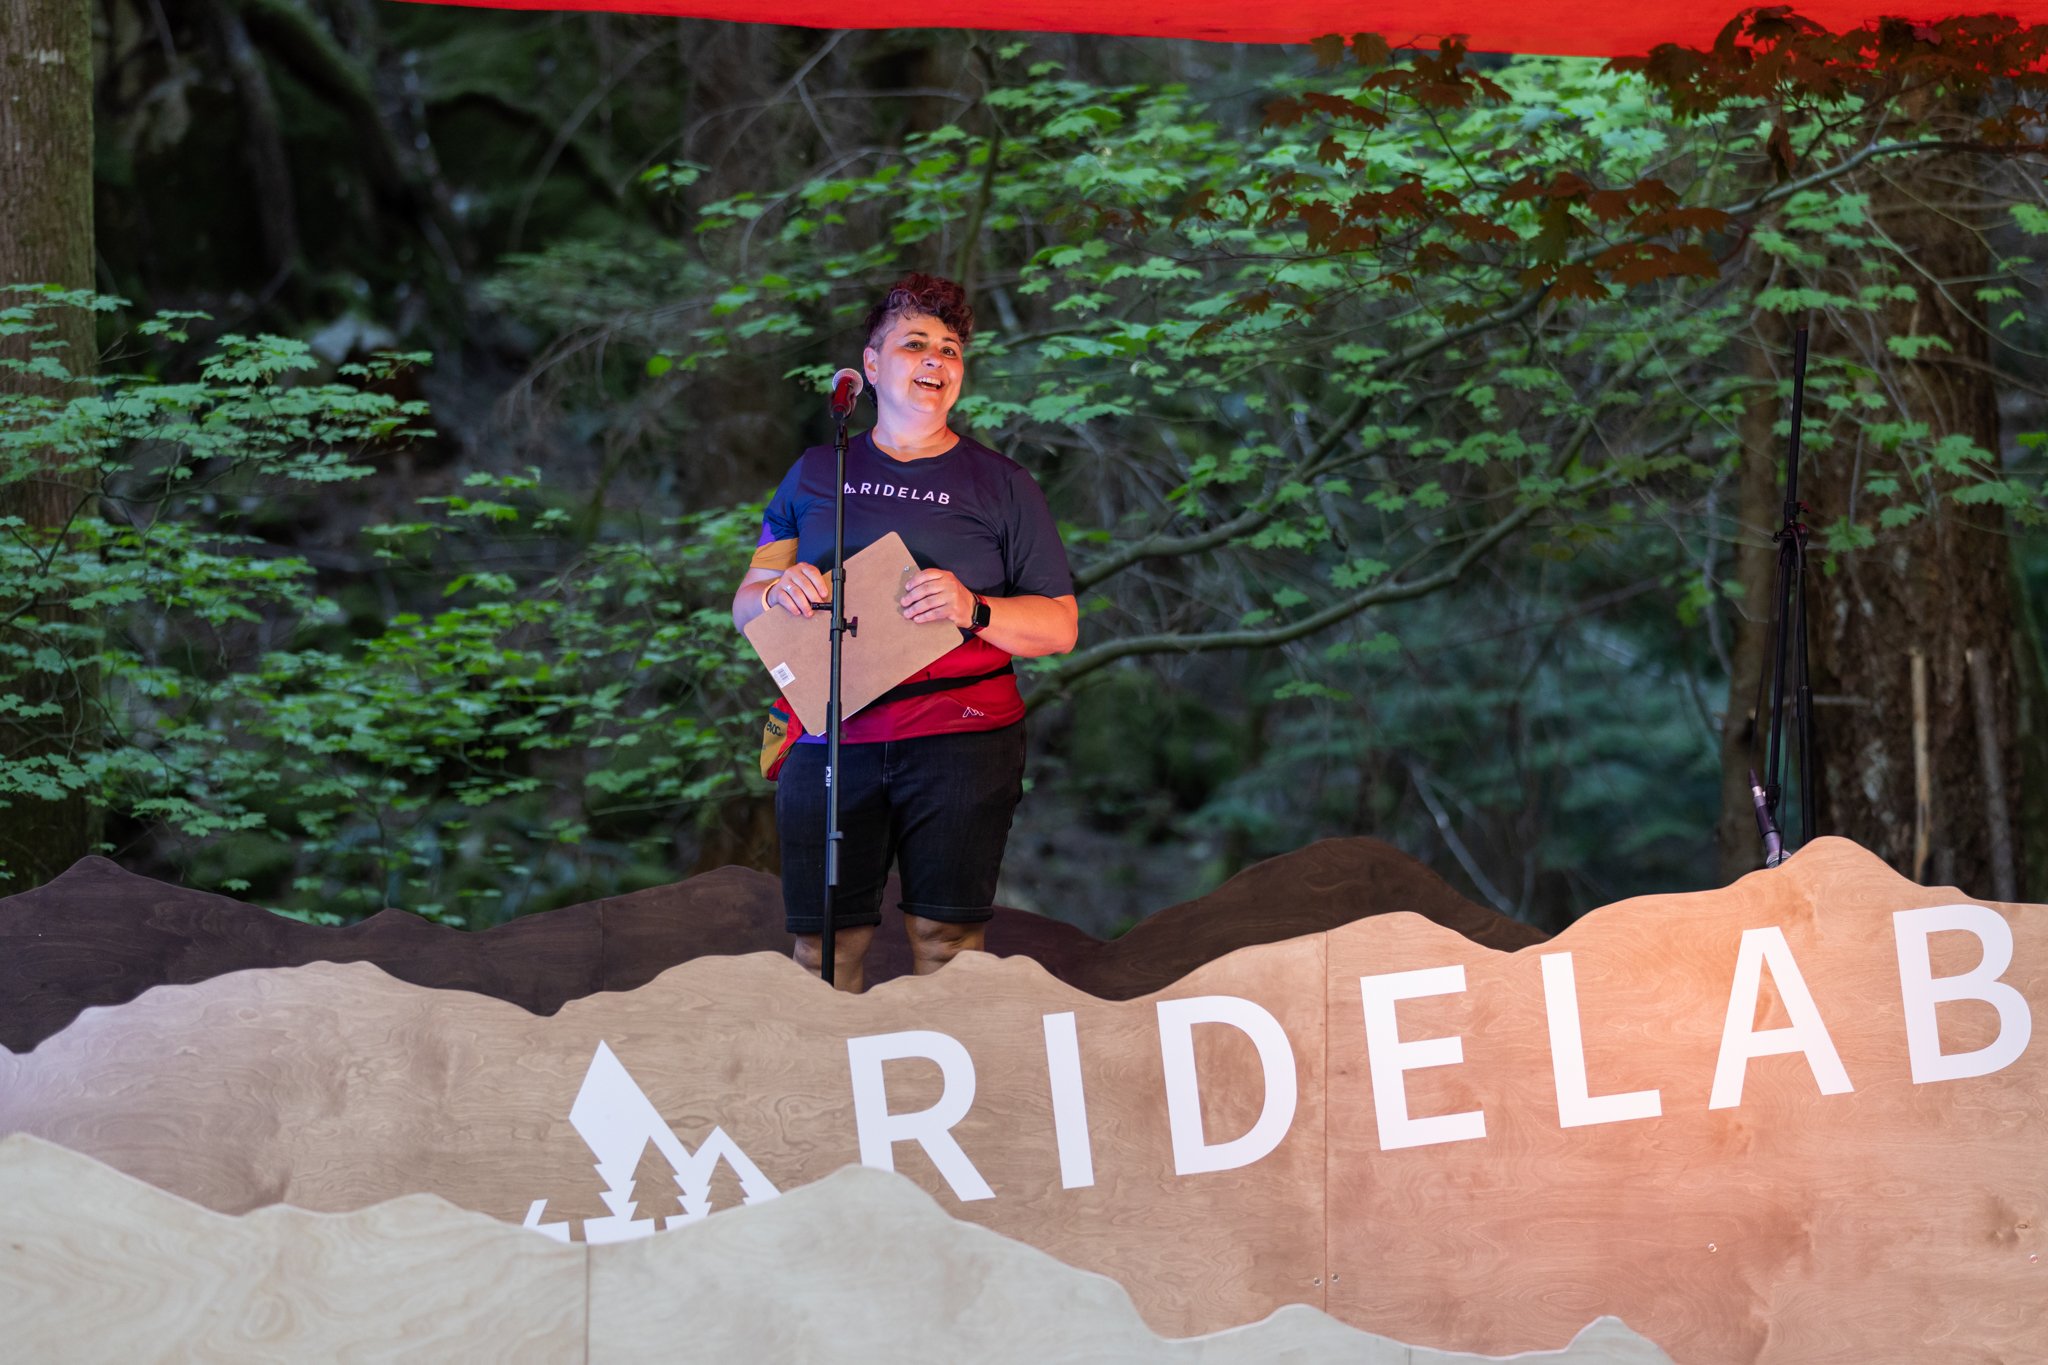  Emcee Debora (no h!) de Napoli kicked things off on the RIDELAB stage in the forest.  